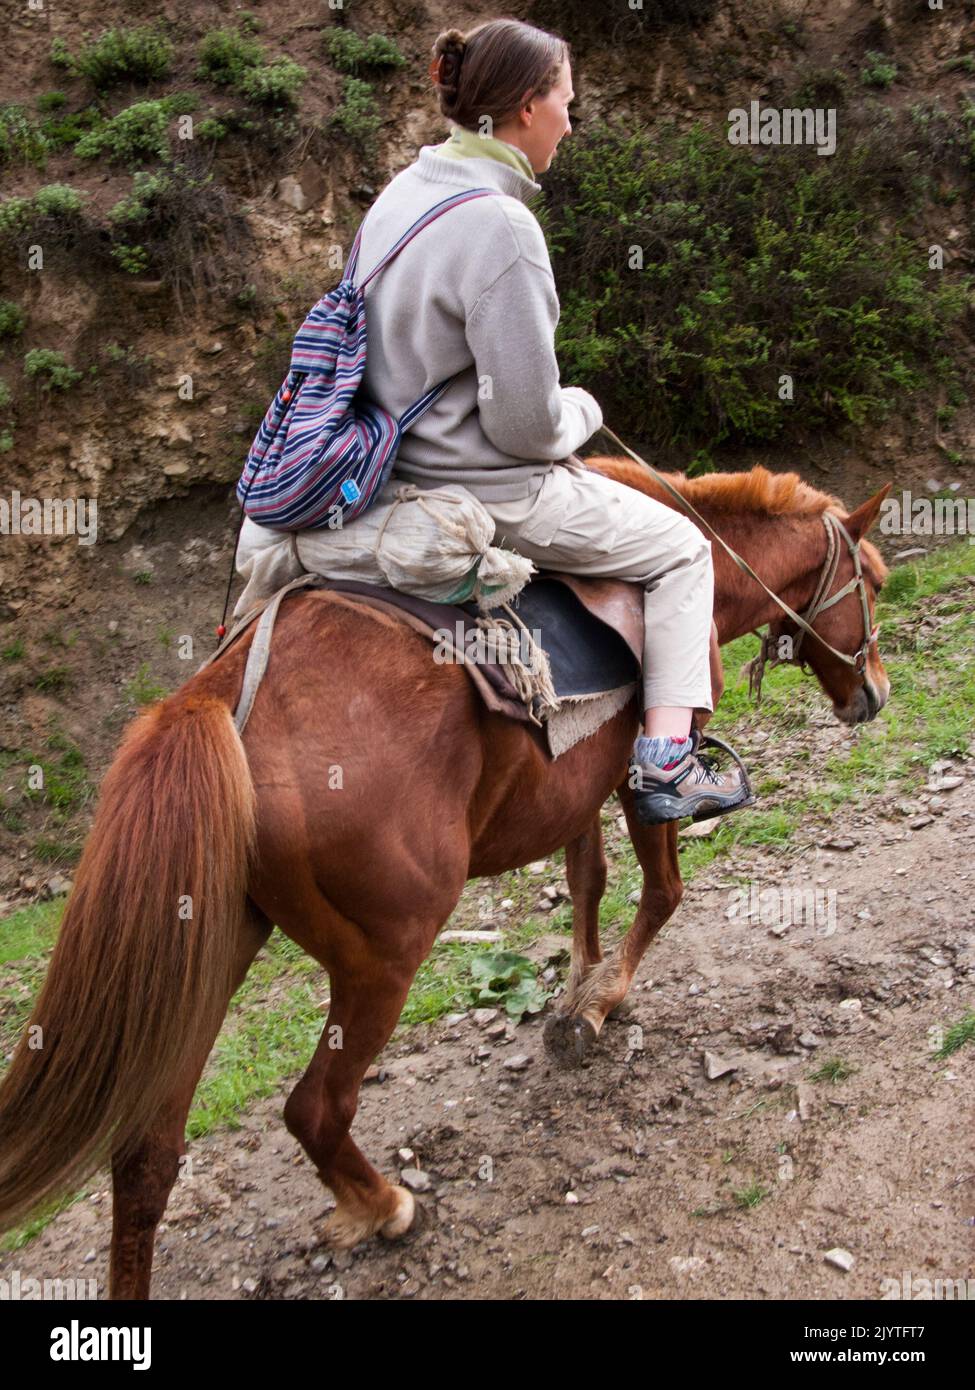 Woman rider on a horse trekking ride / trekking pony ride for western and European holidaymaker, tourists and visitors given by Tibetan  people of Tibet, resident or local to the walled ancient Chinese town of Songpan in northern Sichuan province, China. (126) Stock Photo